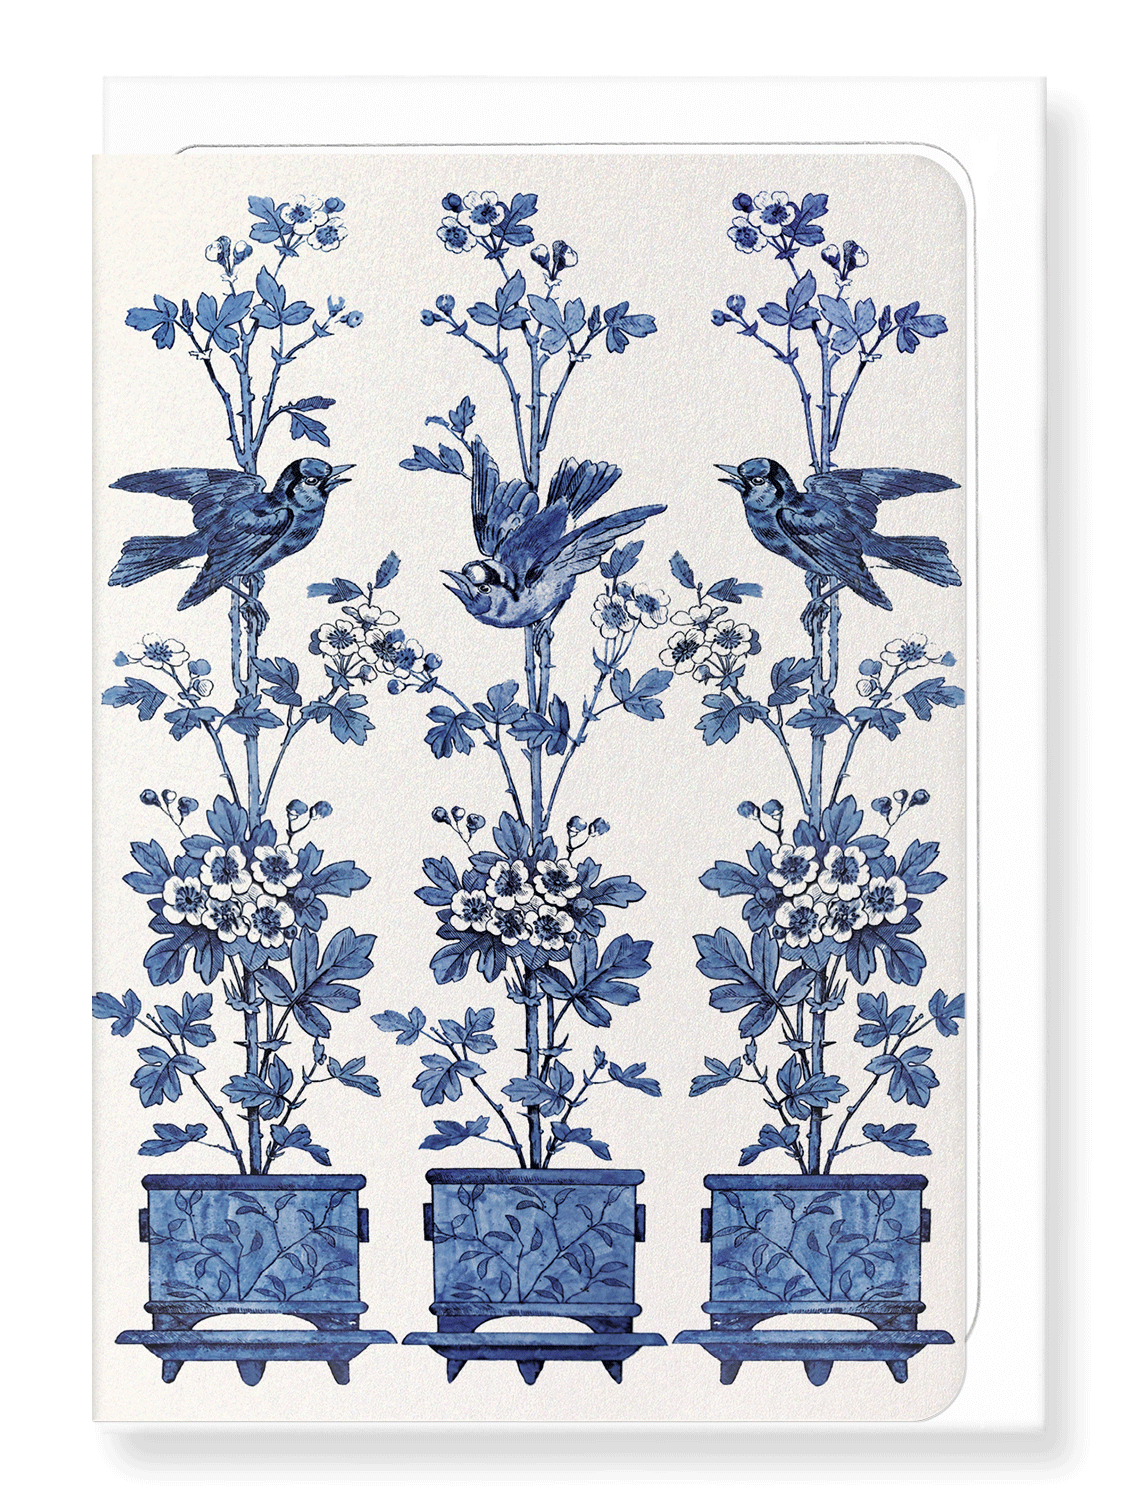 Ezen Designs - Minton tiles birds and flowers (late 19th C.) - Greeting Card - Front